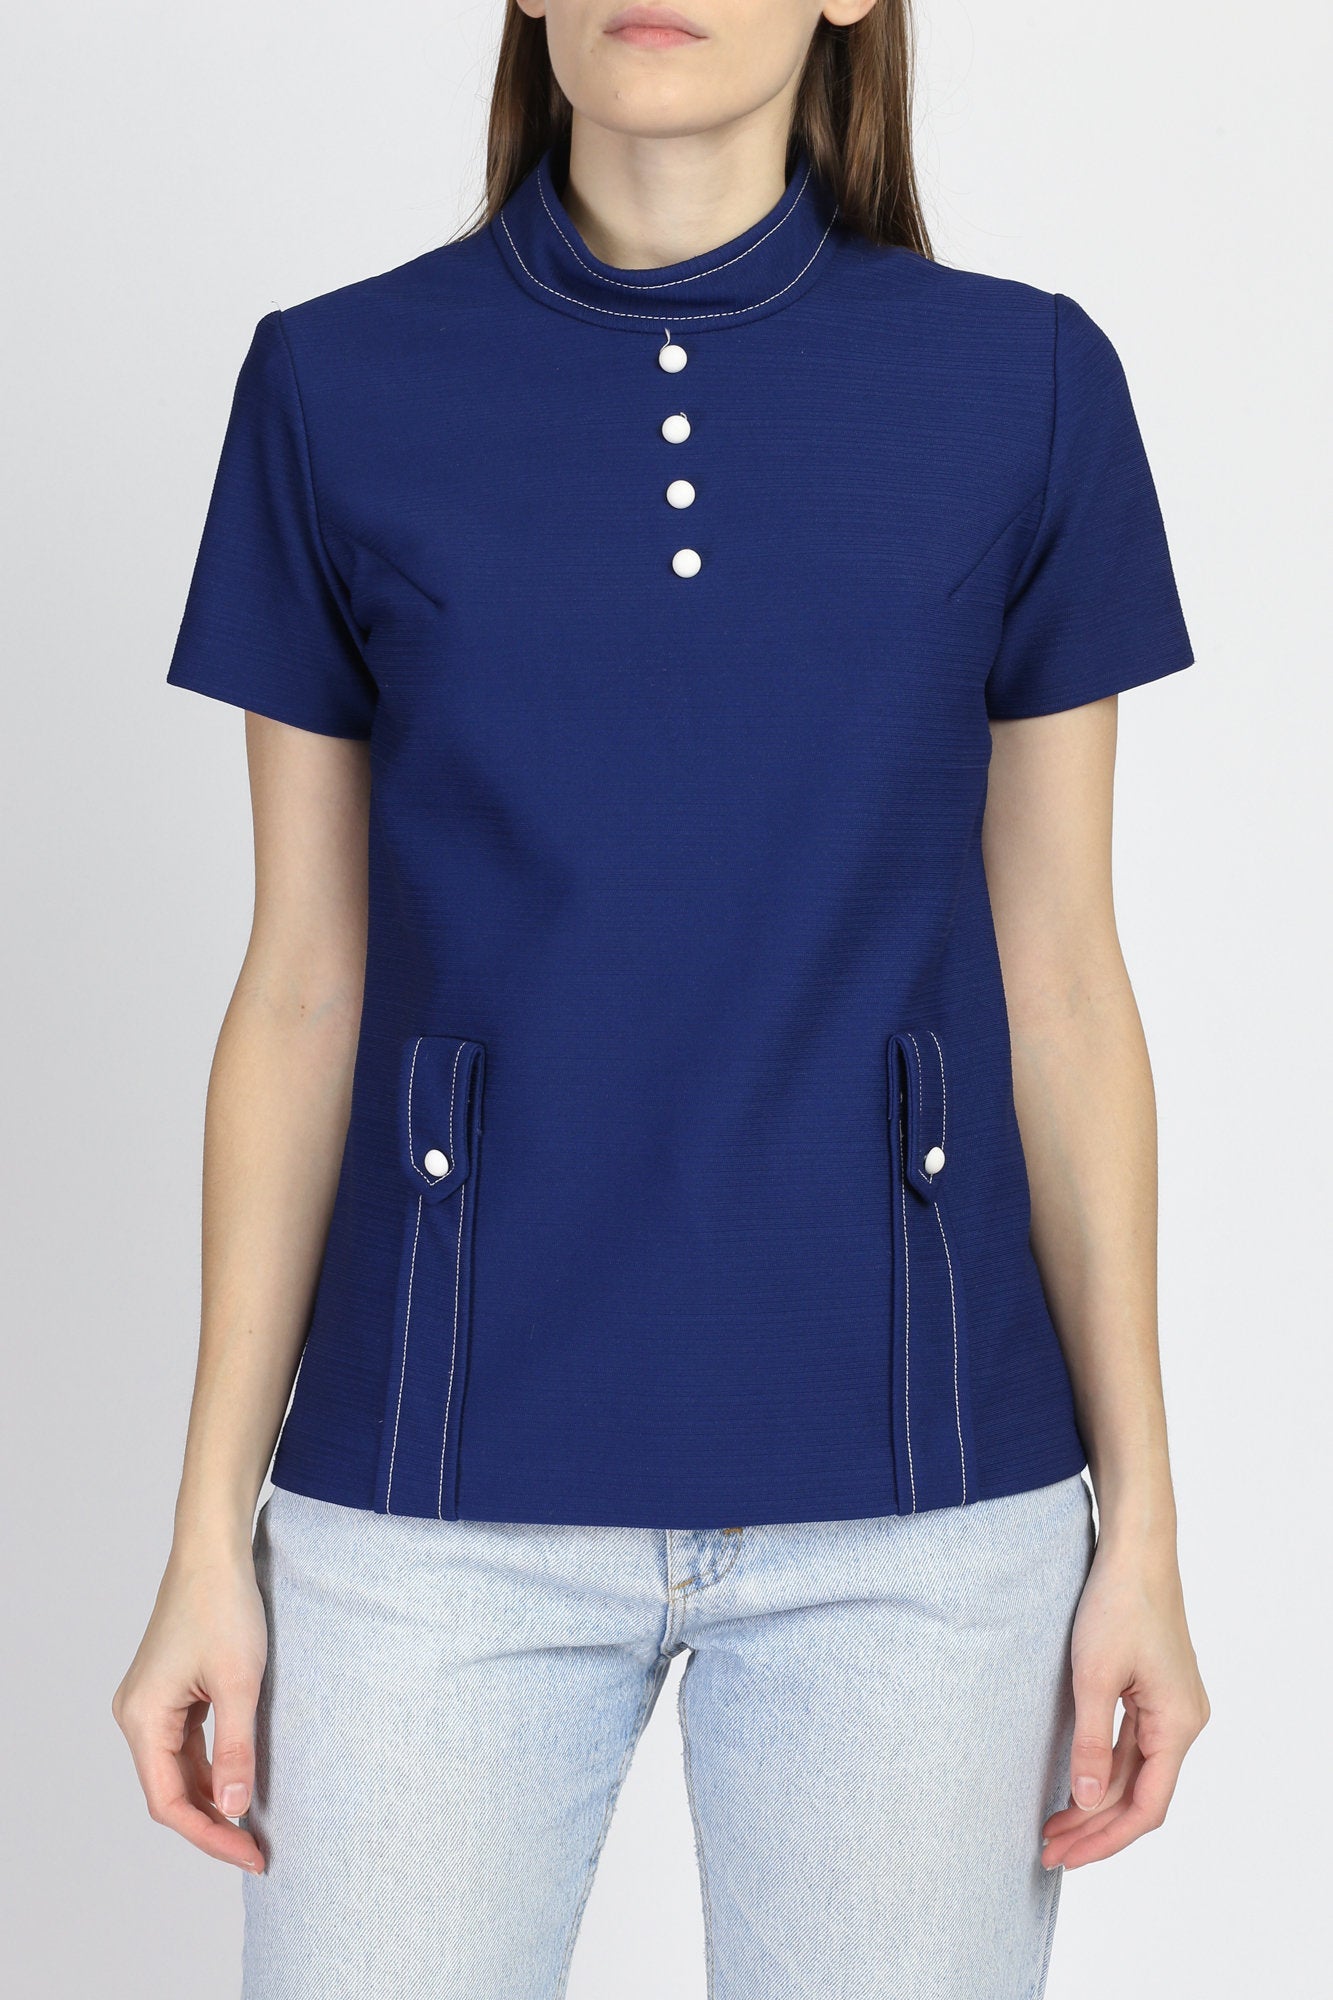 70s Mod Navy Blue Top - Small